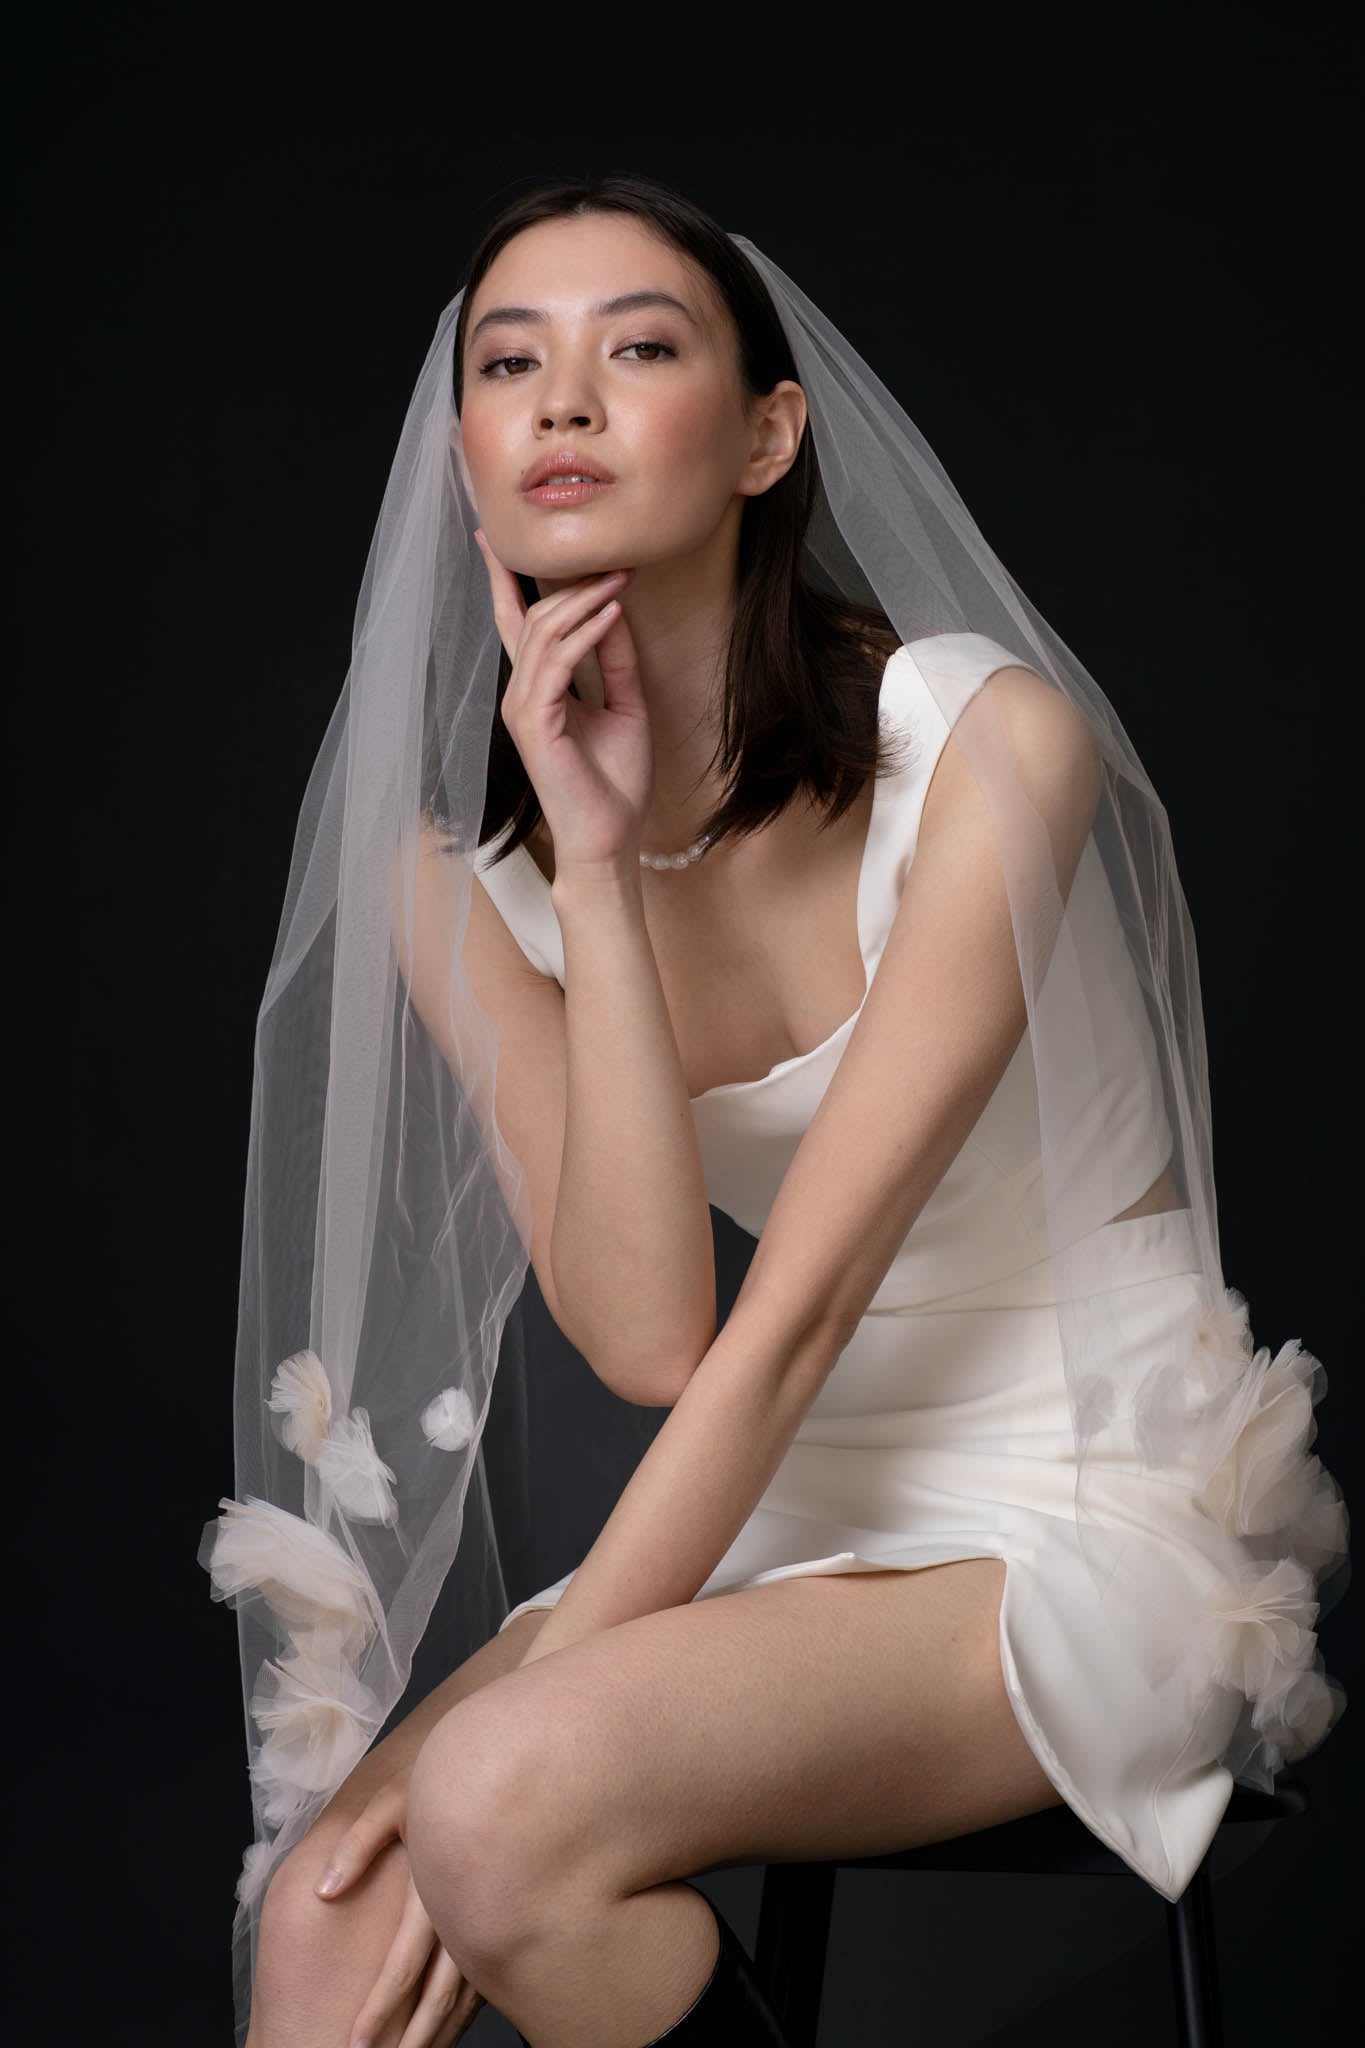 Handmade from delicate tulle, the Jardin drop veil features intricate floral details for a truly unique and unforgettable bridal accessory.